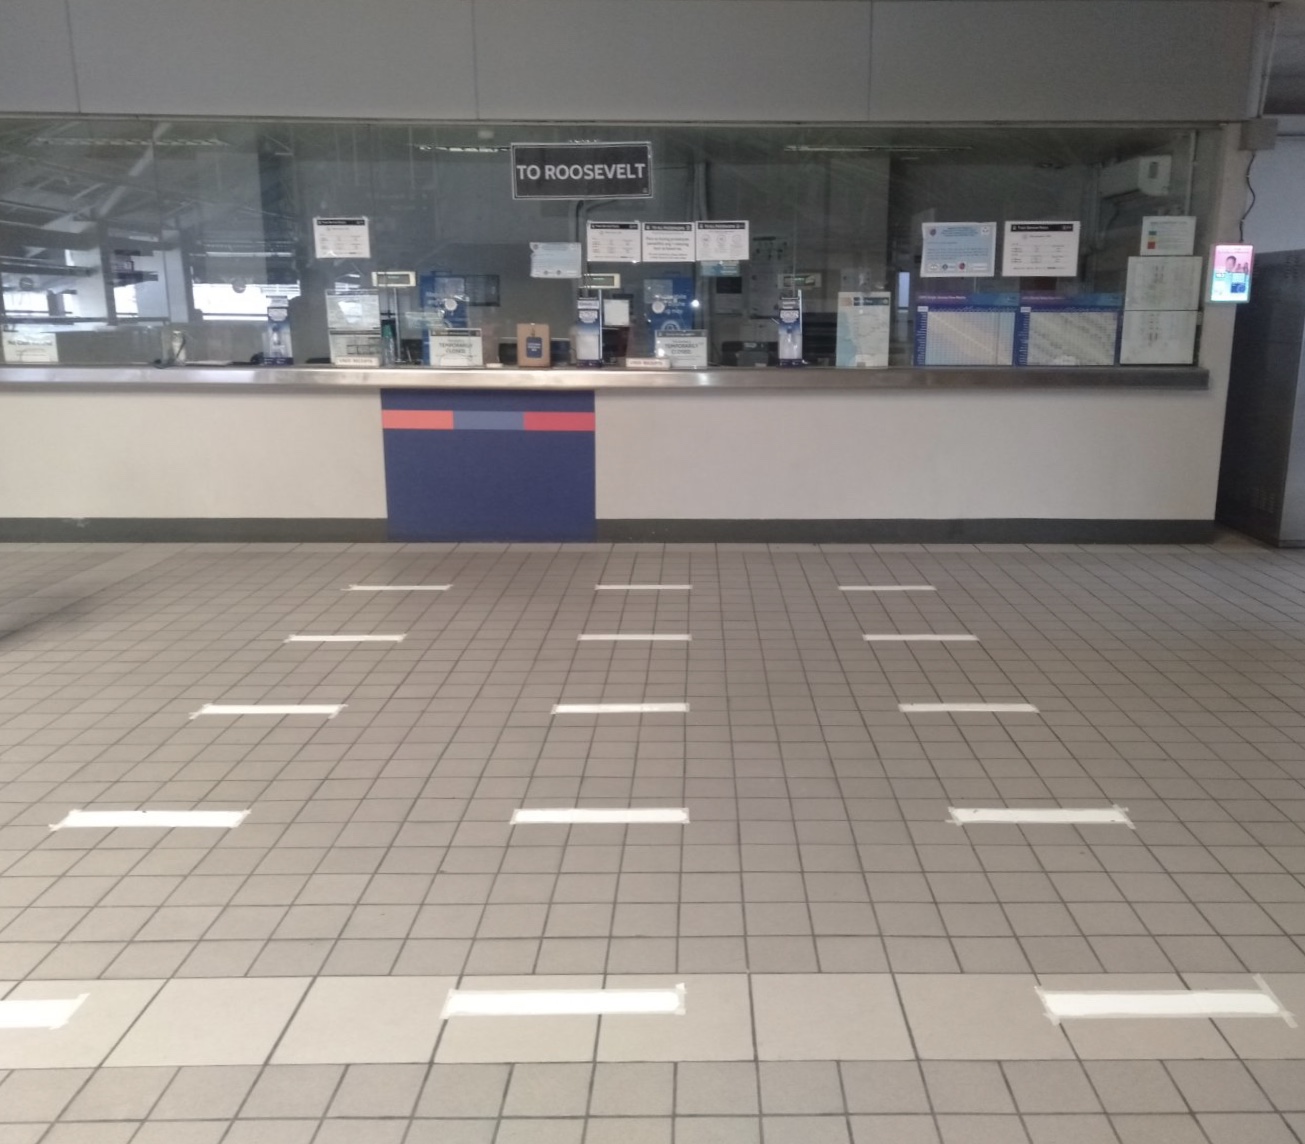 PHYSICAL DISTANCING. The area in front of the ticket booth is marked to guide passengers to observe physical distancing. Photo from LRMC 